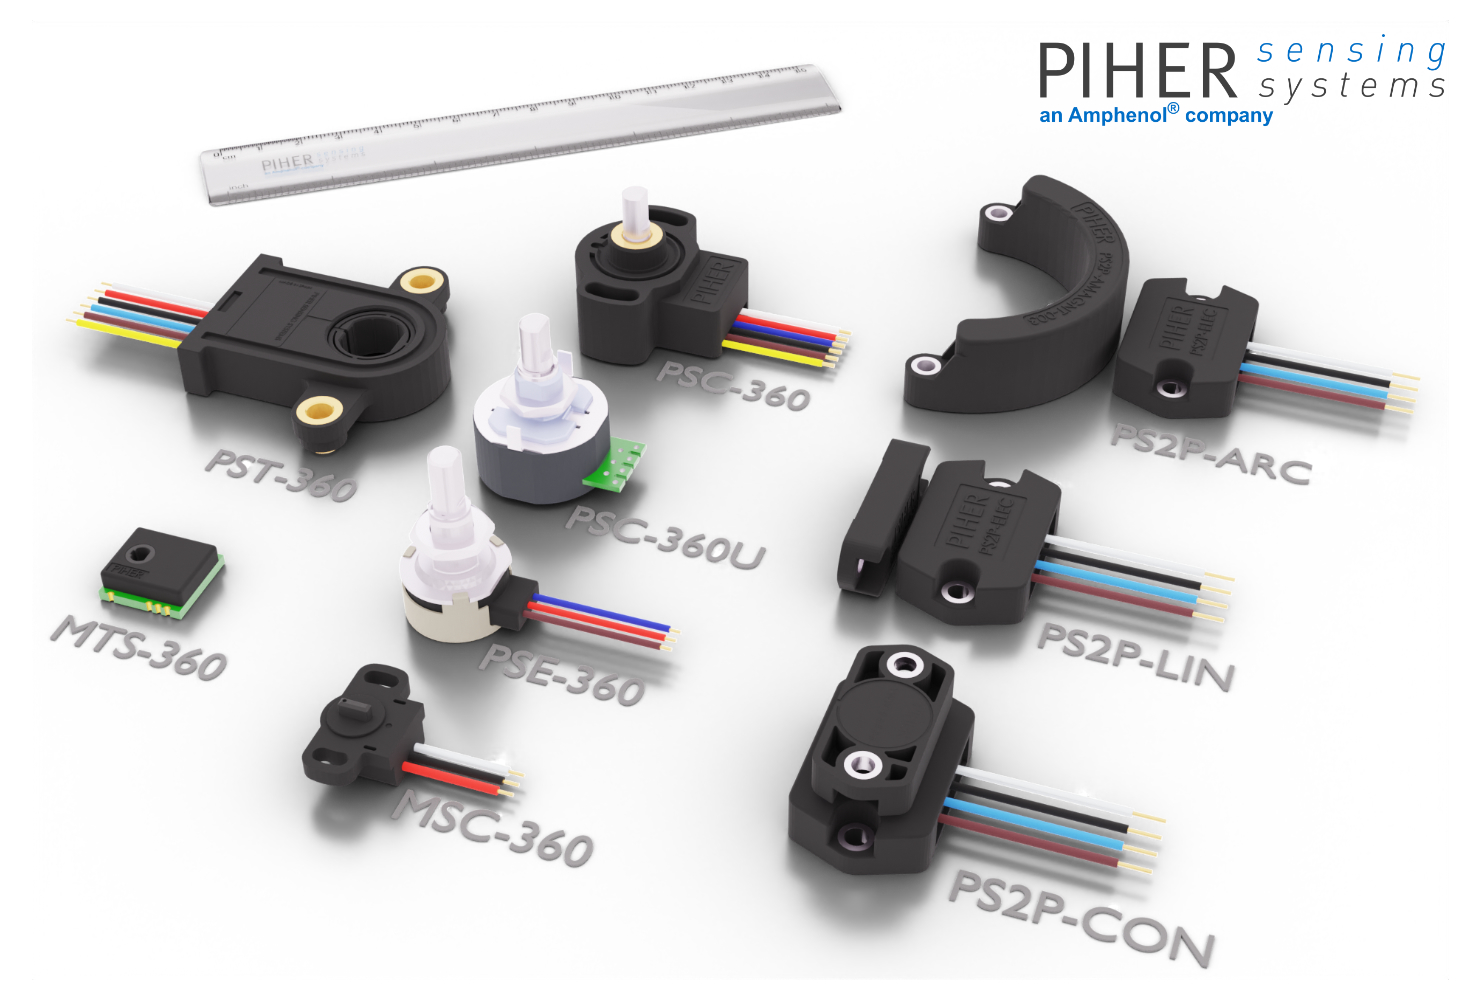 Contactless Position Sensors of Piher Sensing Systems